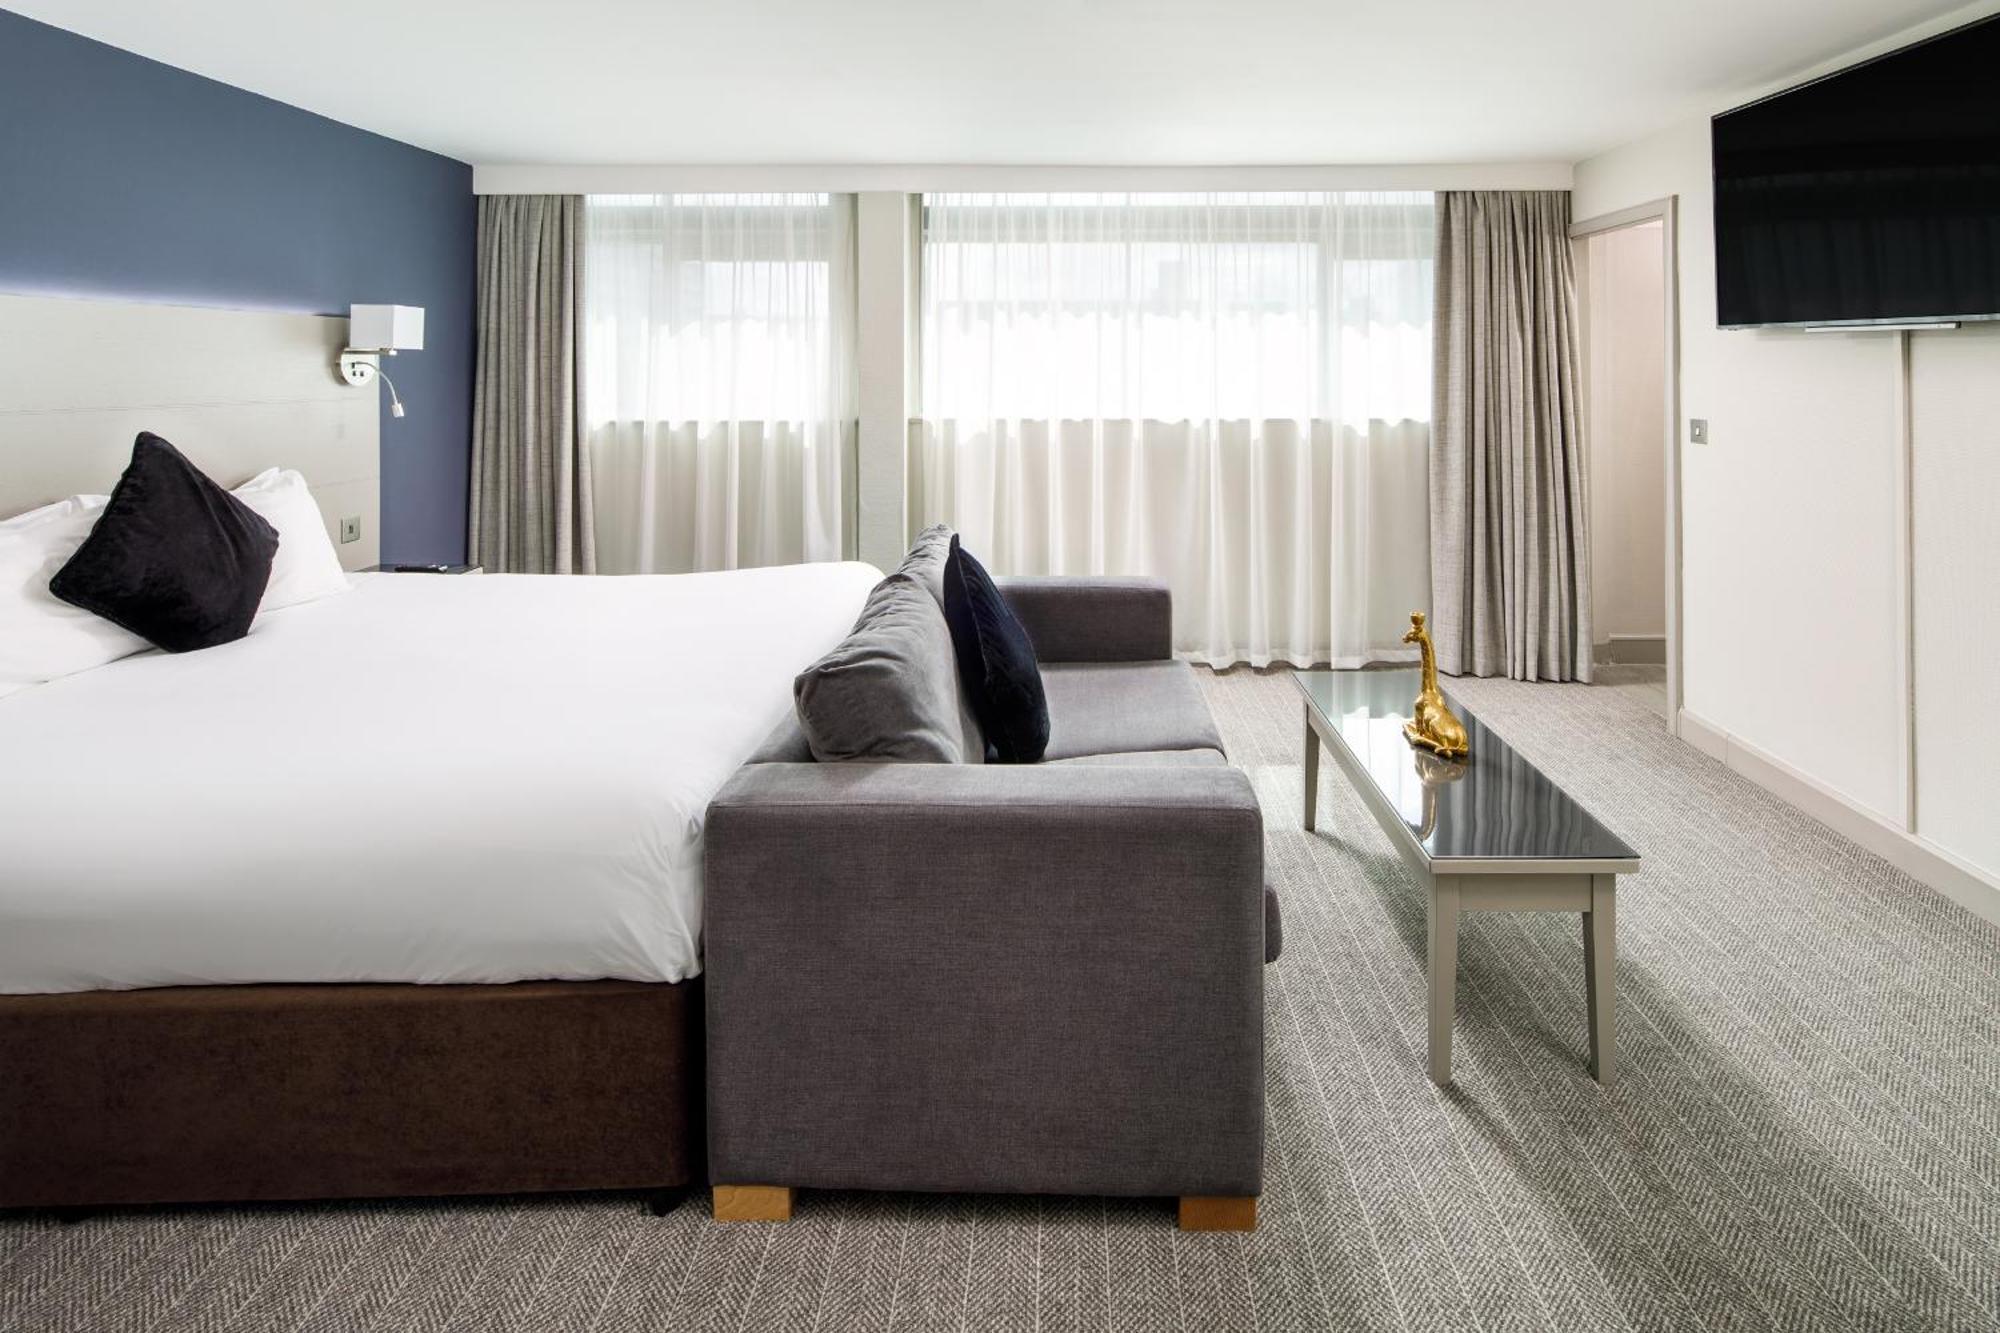 Mercure Manchester Piccadilly Hotel Экстерьер фото